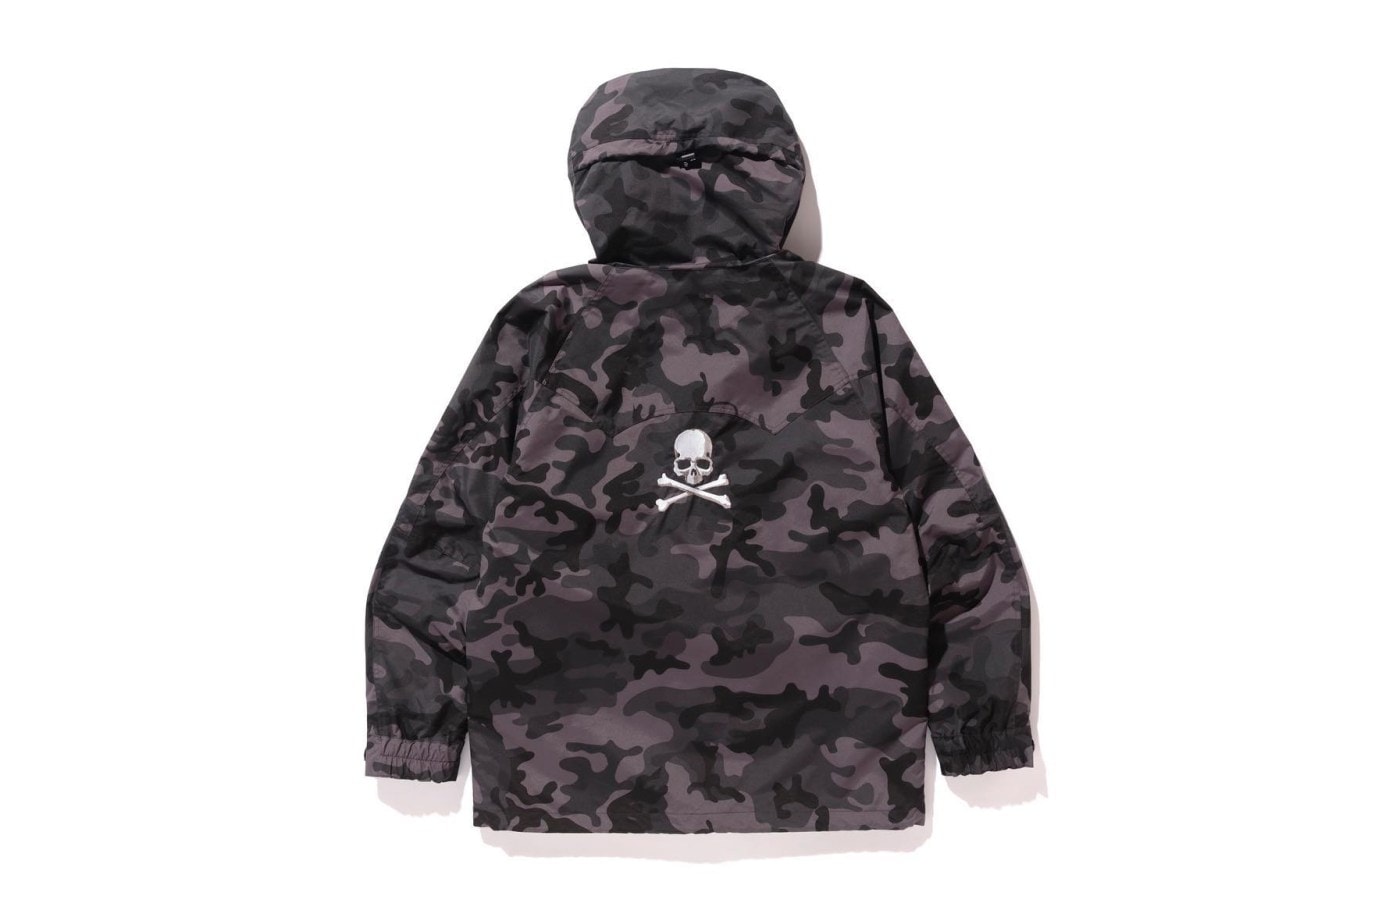 mastermind JAPAN x BAPE 2016 Collection First Look